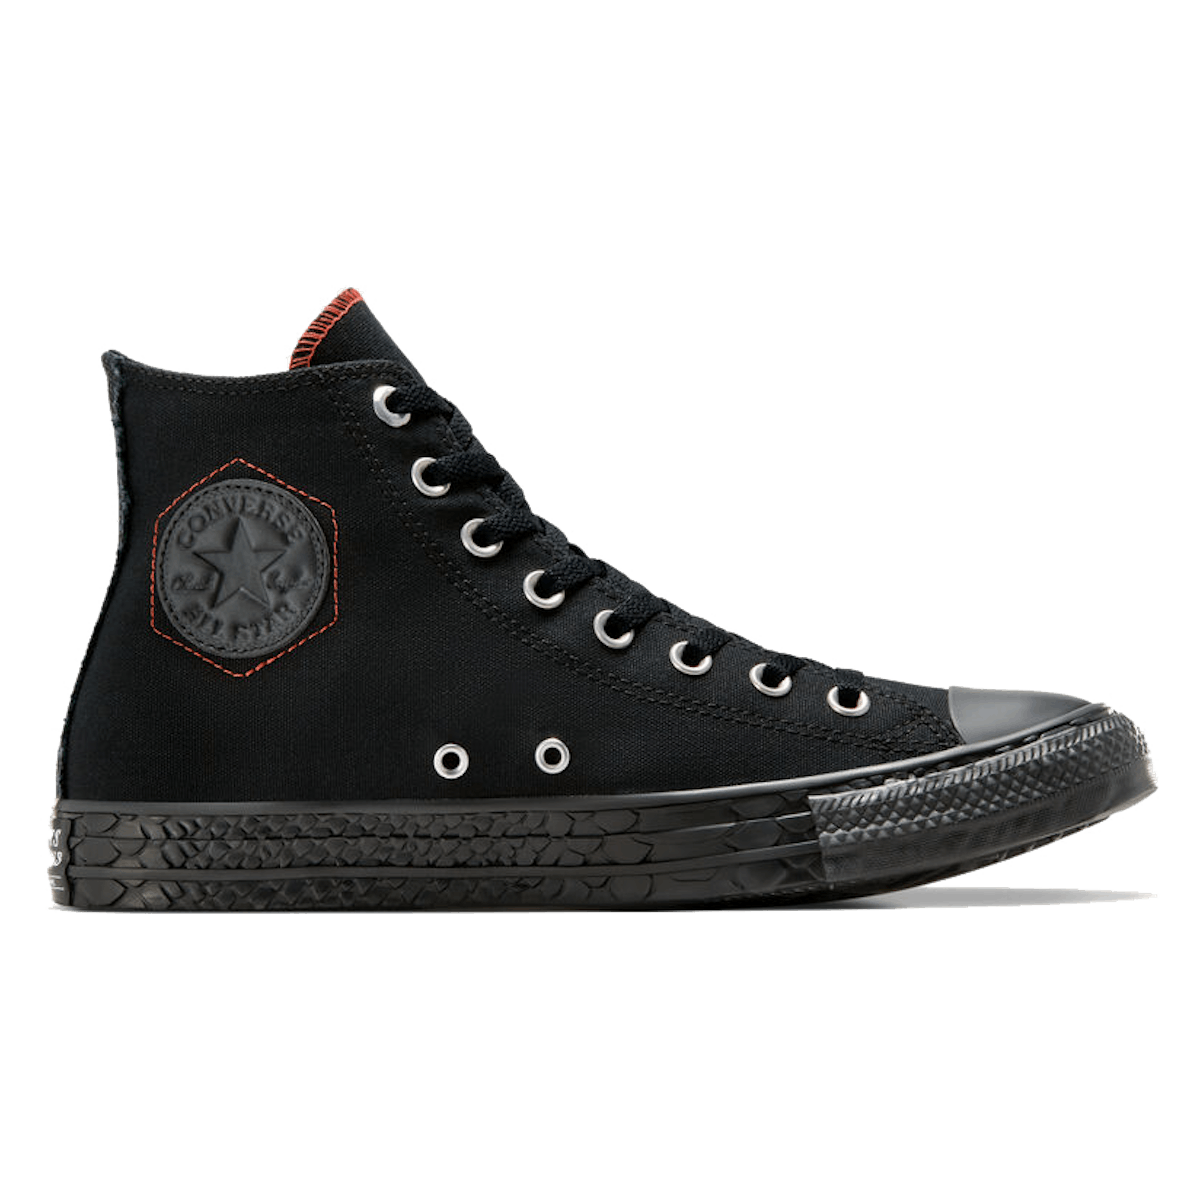 Dungeons & Dragons x Converse Chuck Taylor All Star "Black / Red"